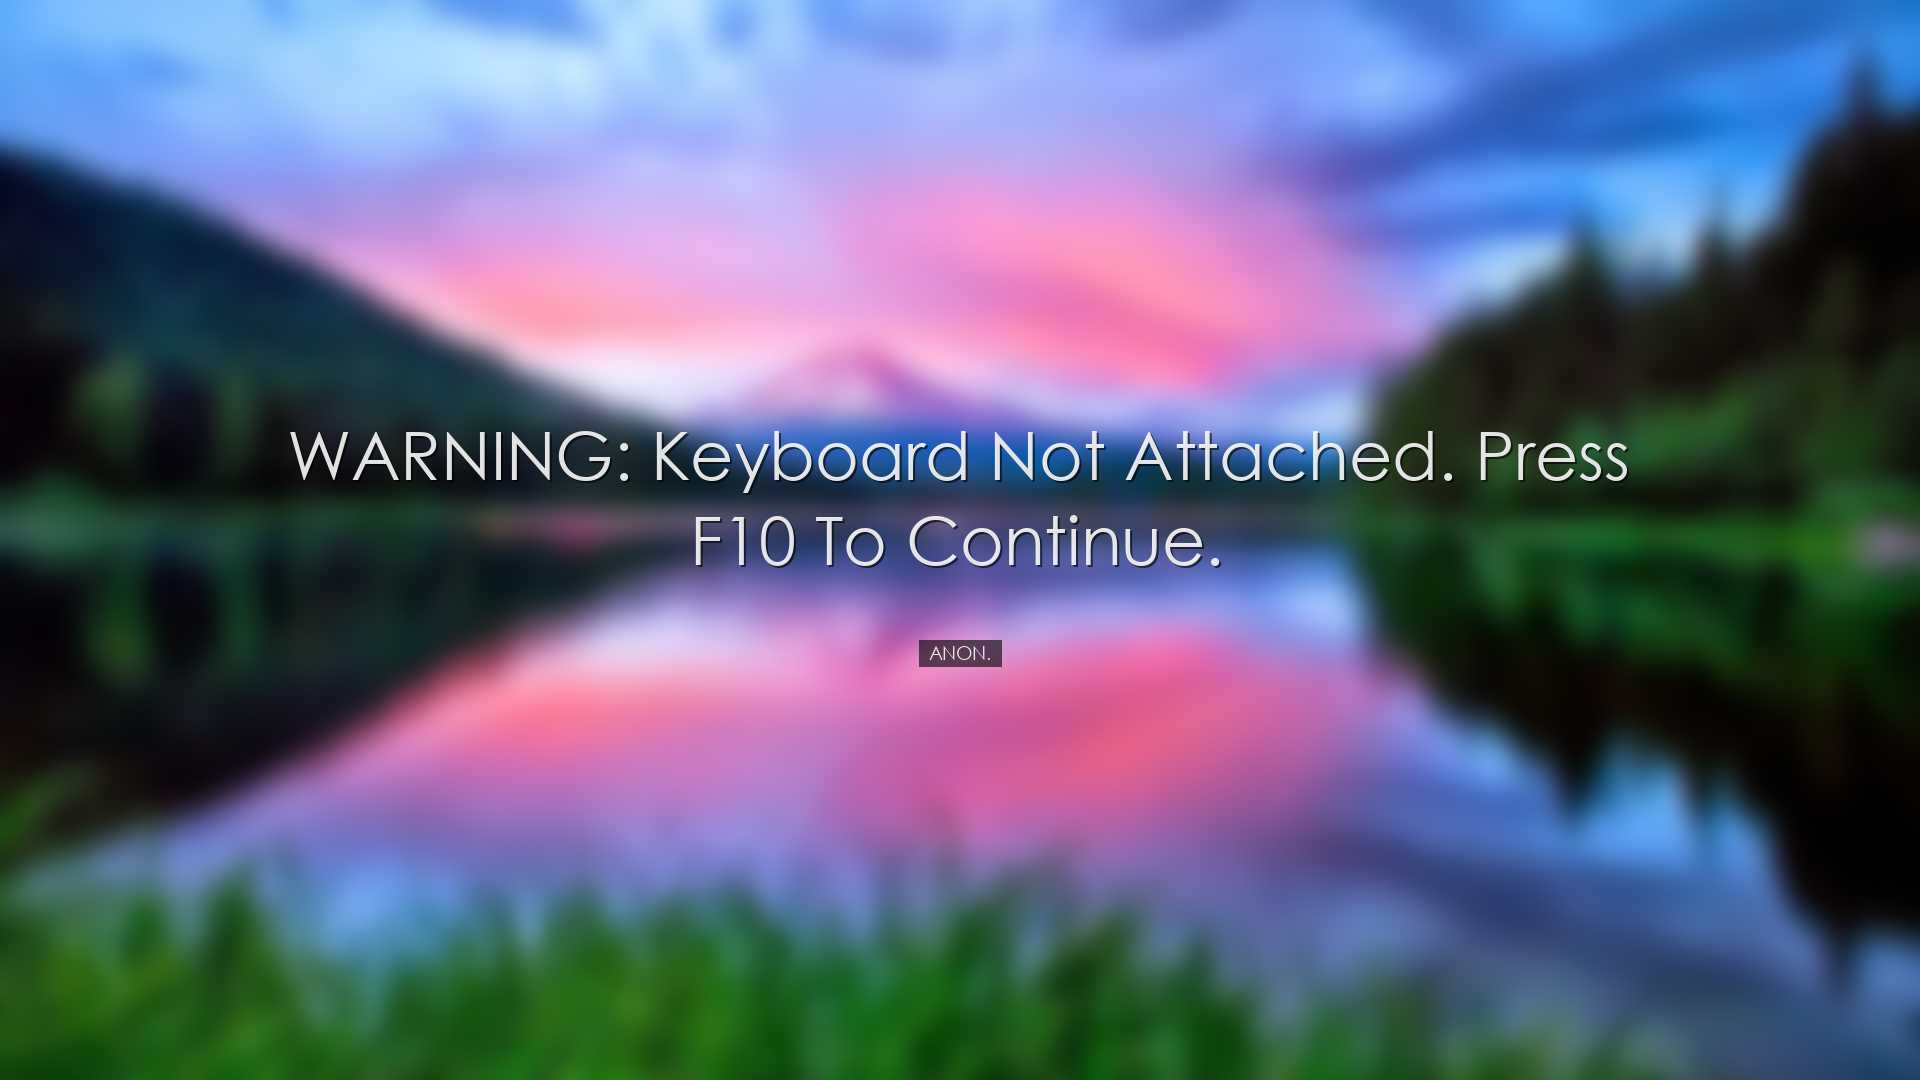 WARNING: Keyboard Not Attached. Press F10 to Continue. - Anon.